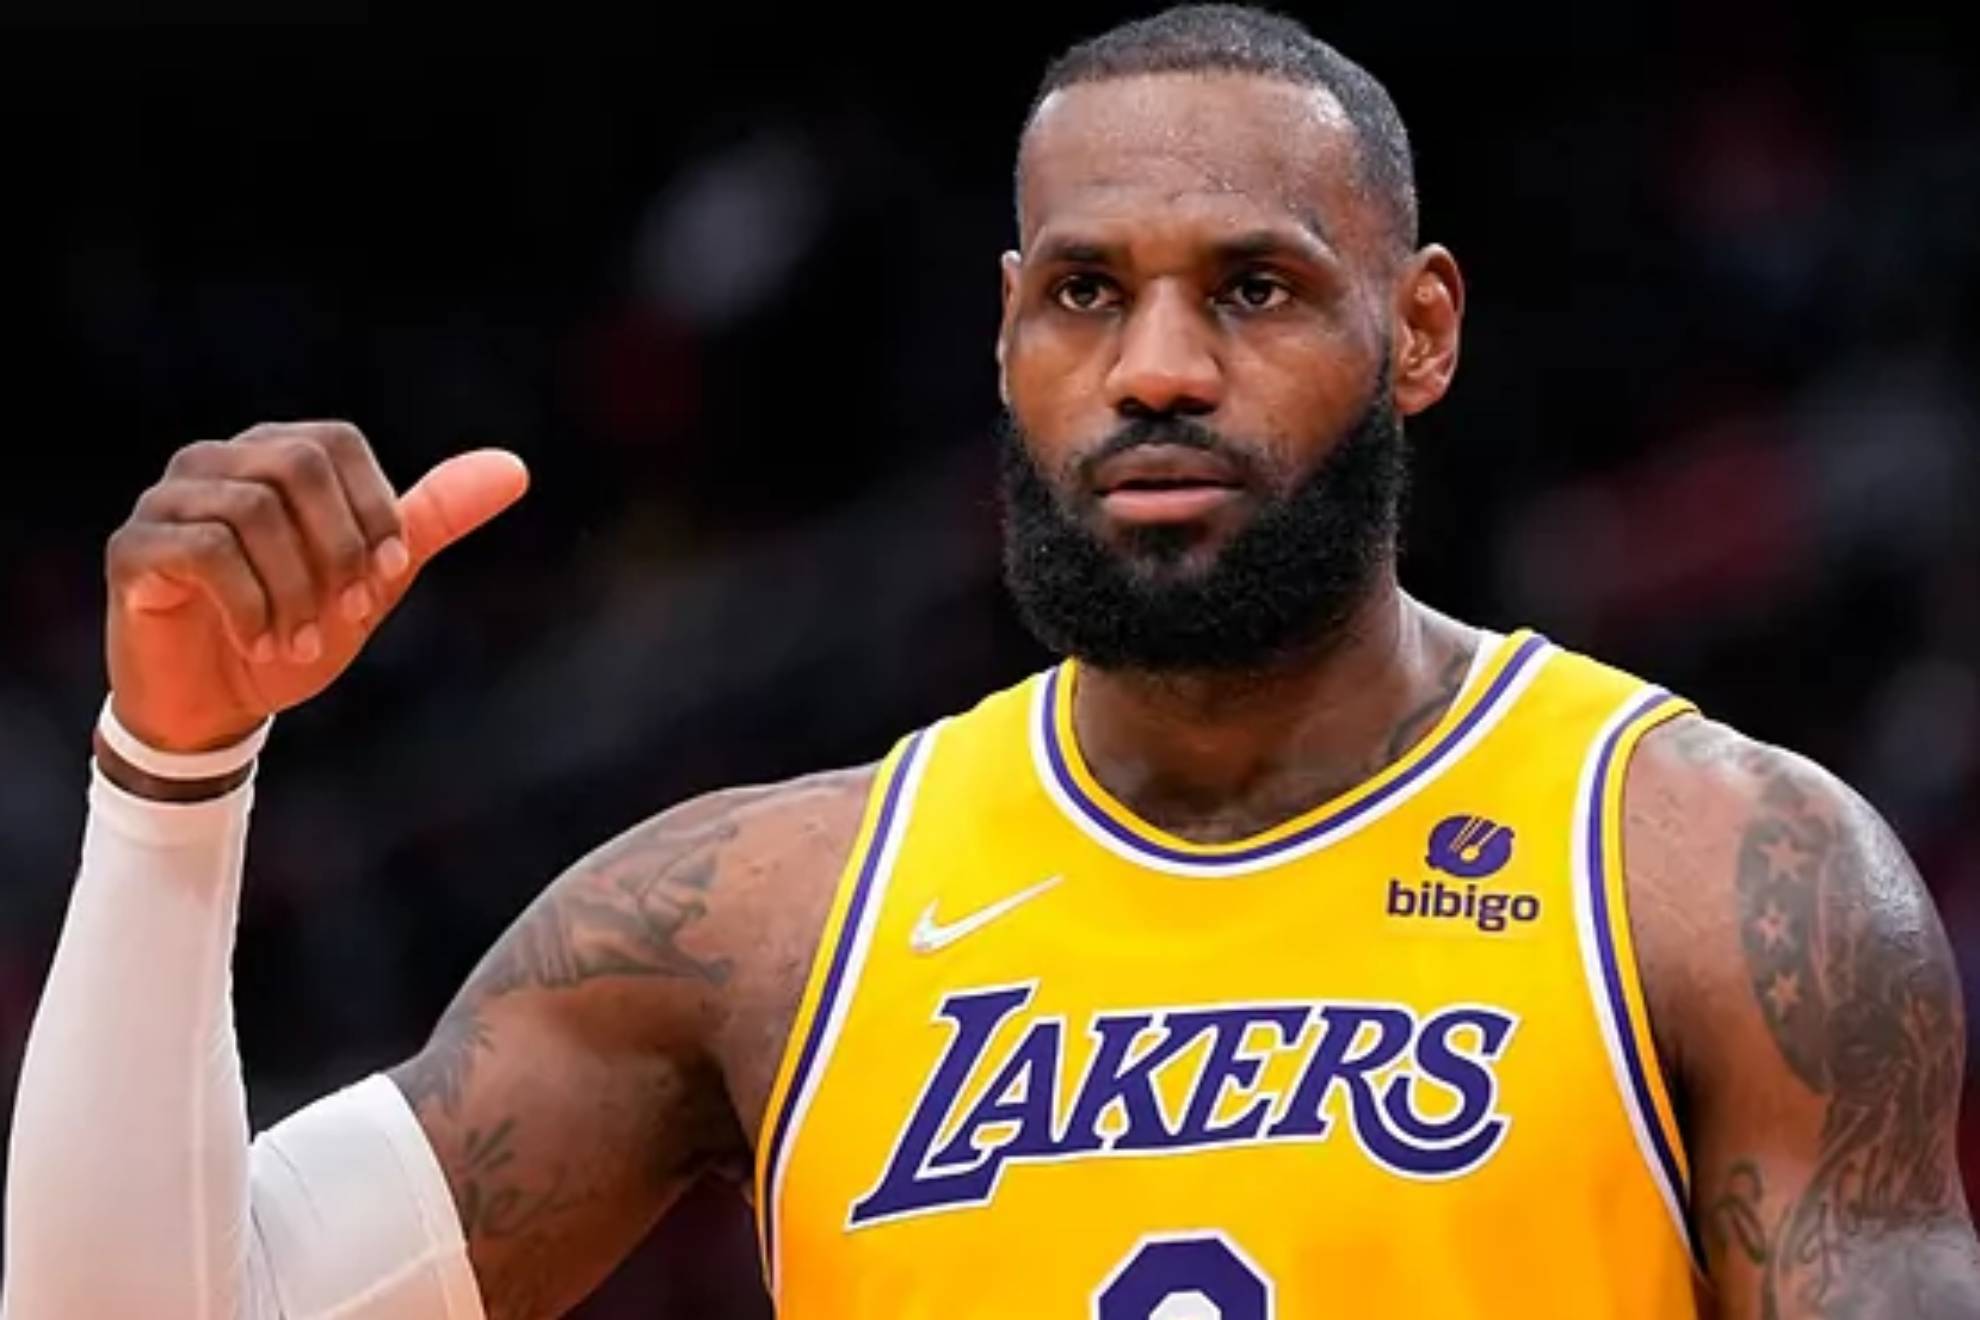 Lebron James Net Worth, Age, Height, Parents, More